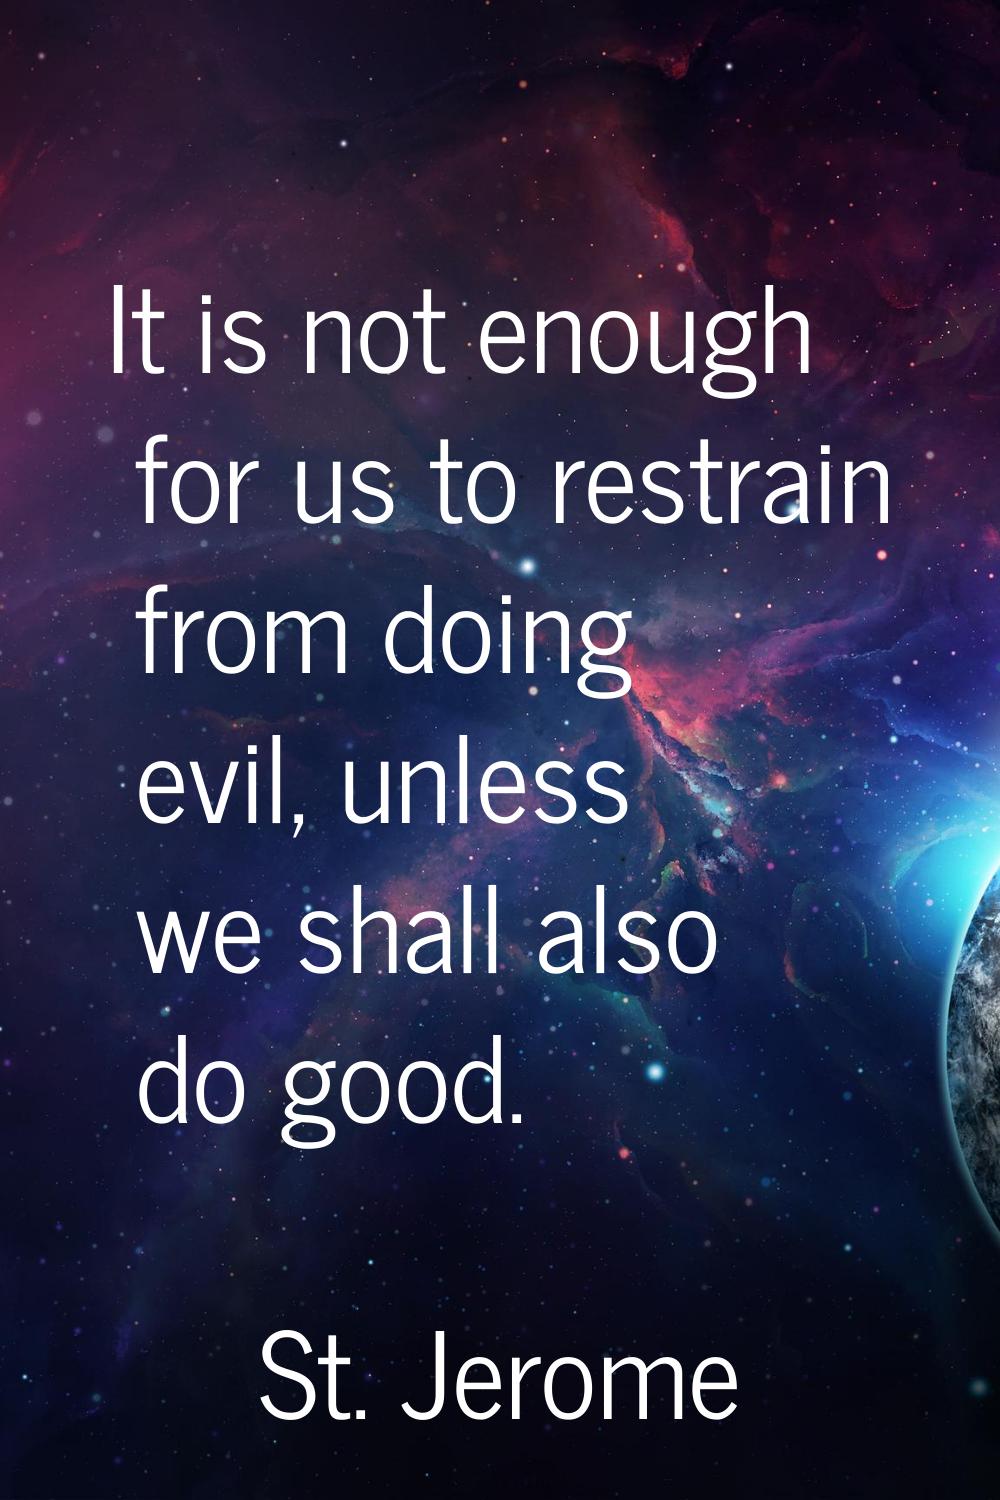 It is not enough for us to restrain from doing evil, unless we shall also do good.